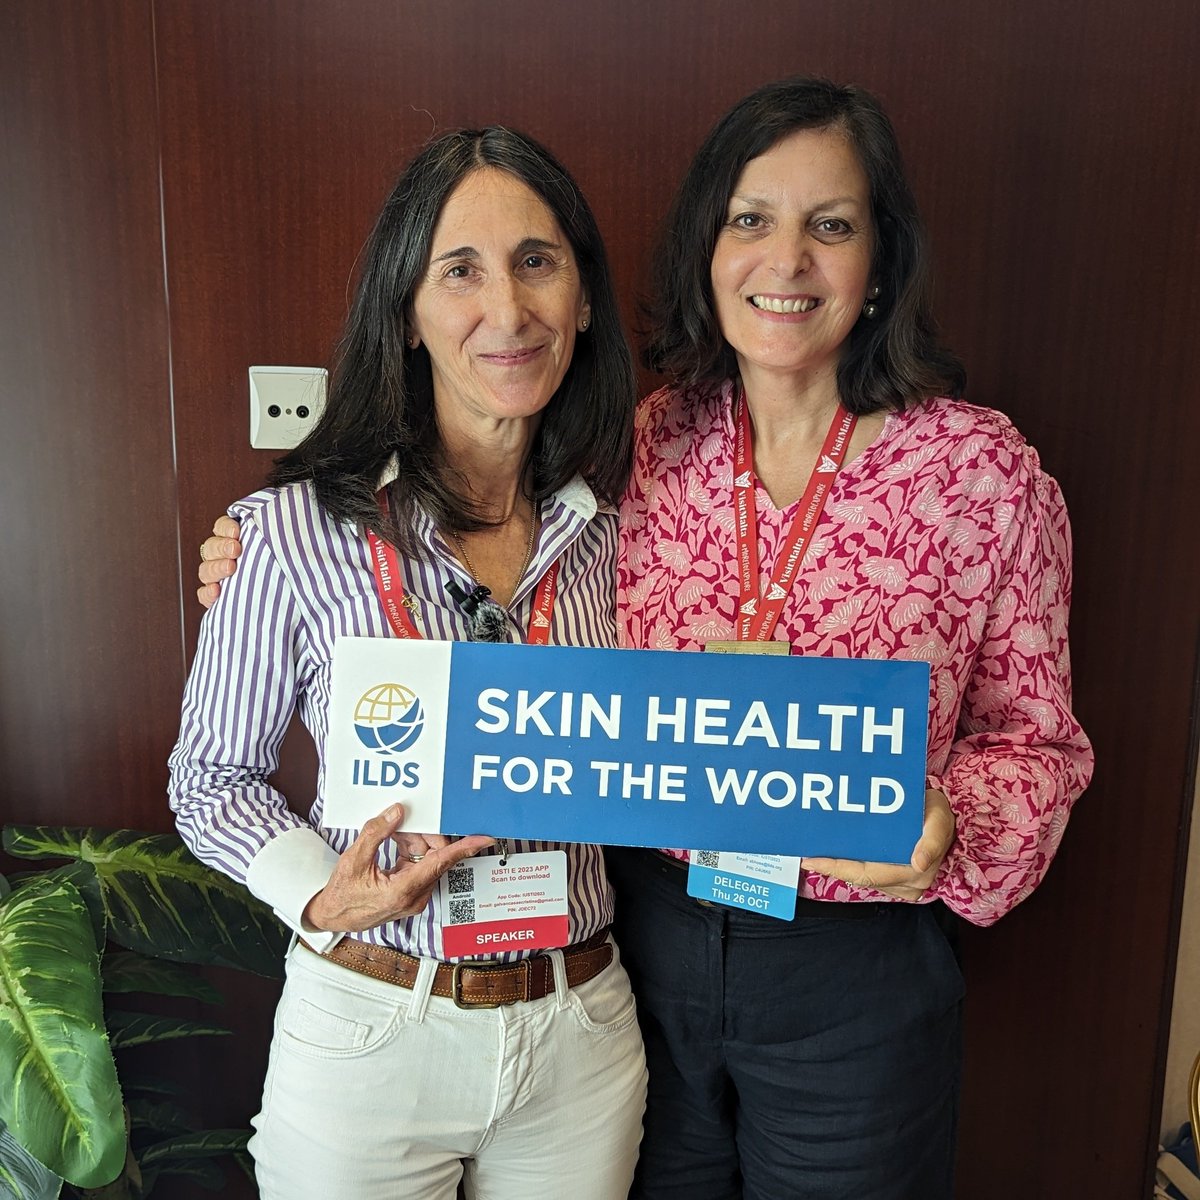 Vice-Chair of The International Alliance for the Control of Scabies (IACS), Cristina Galván Casas and ILDS Chief Executive Officer (CEO), Arpita Bhose at the ILDS Migrant Health Symposium. #MigrantHealth #SkinHealth4thWorld